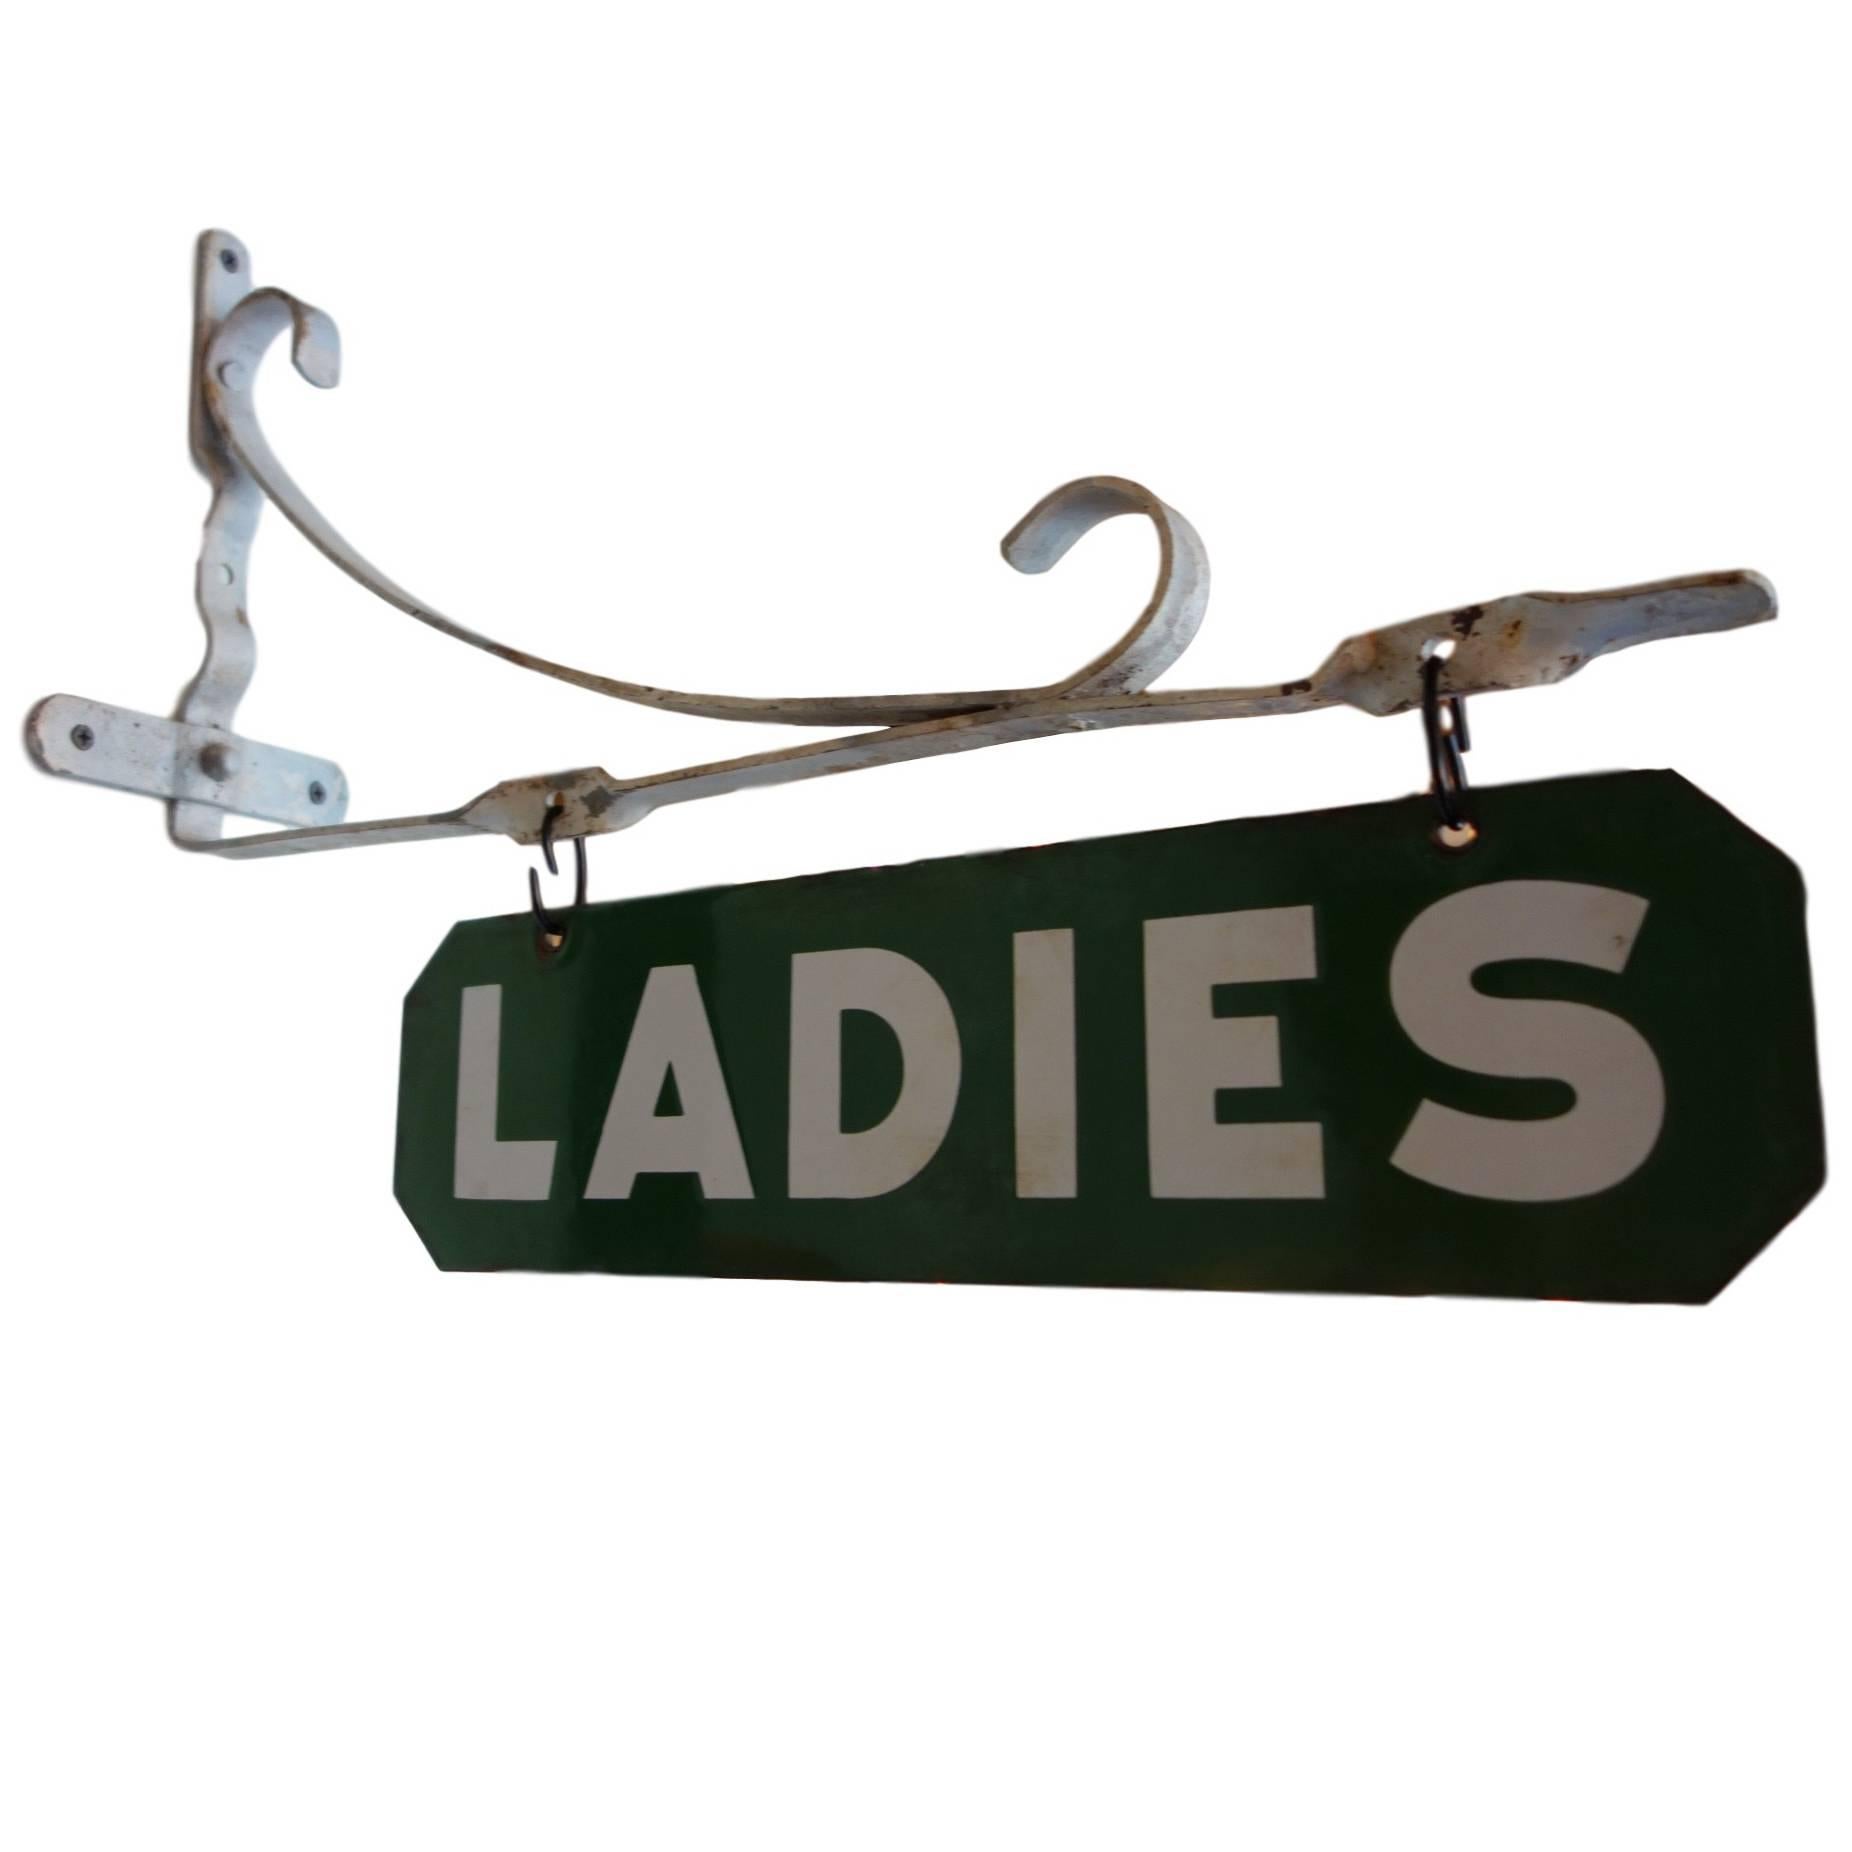 Double-Sided Porcelain ‘Ladies’ Sign with Wall Mount Bracket